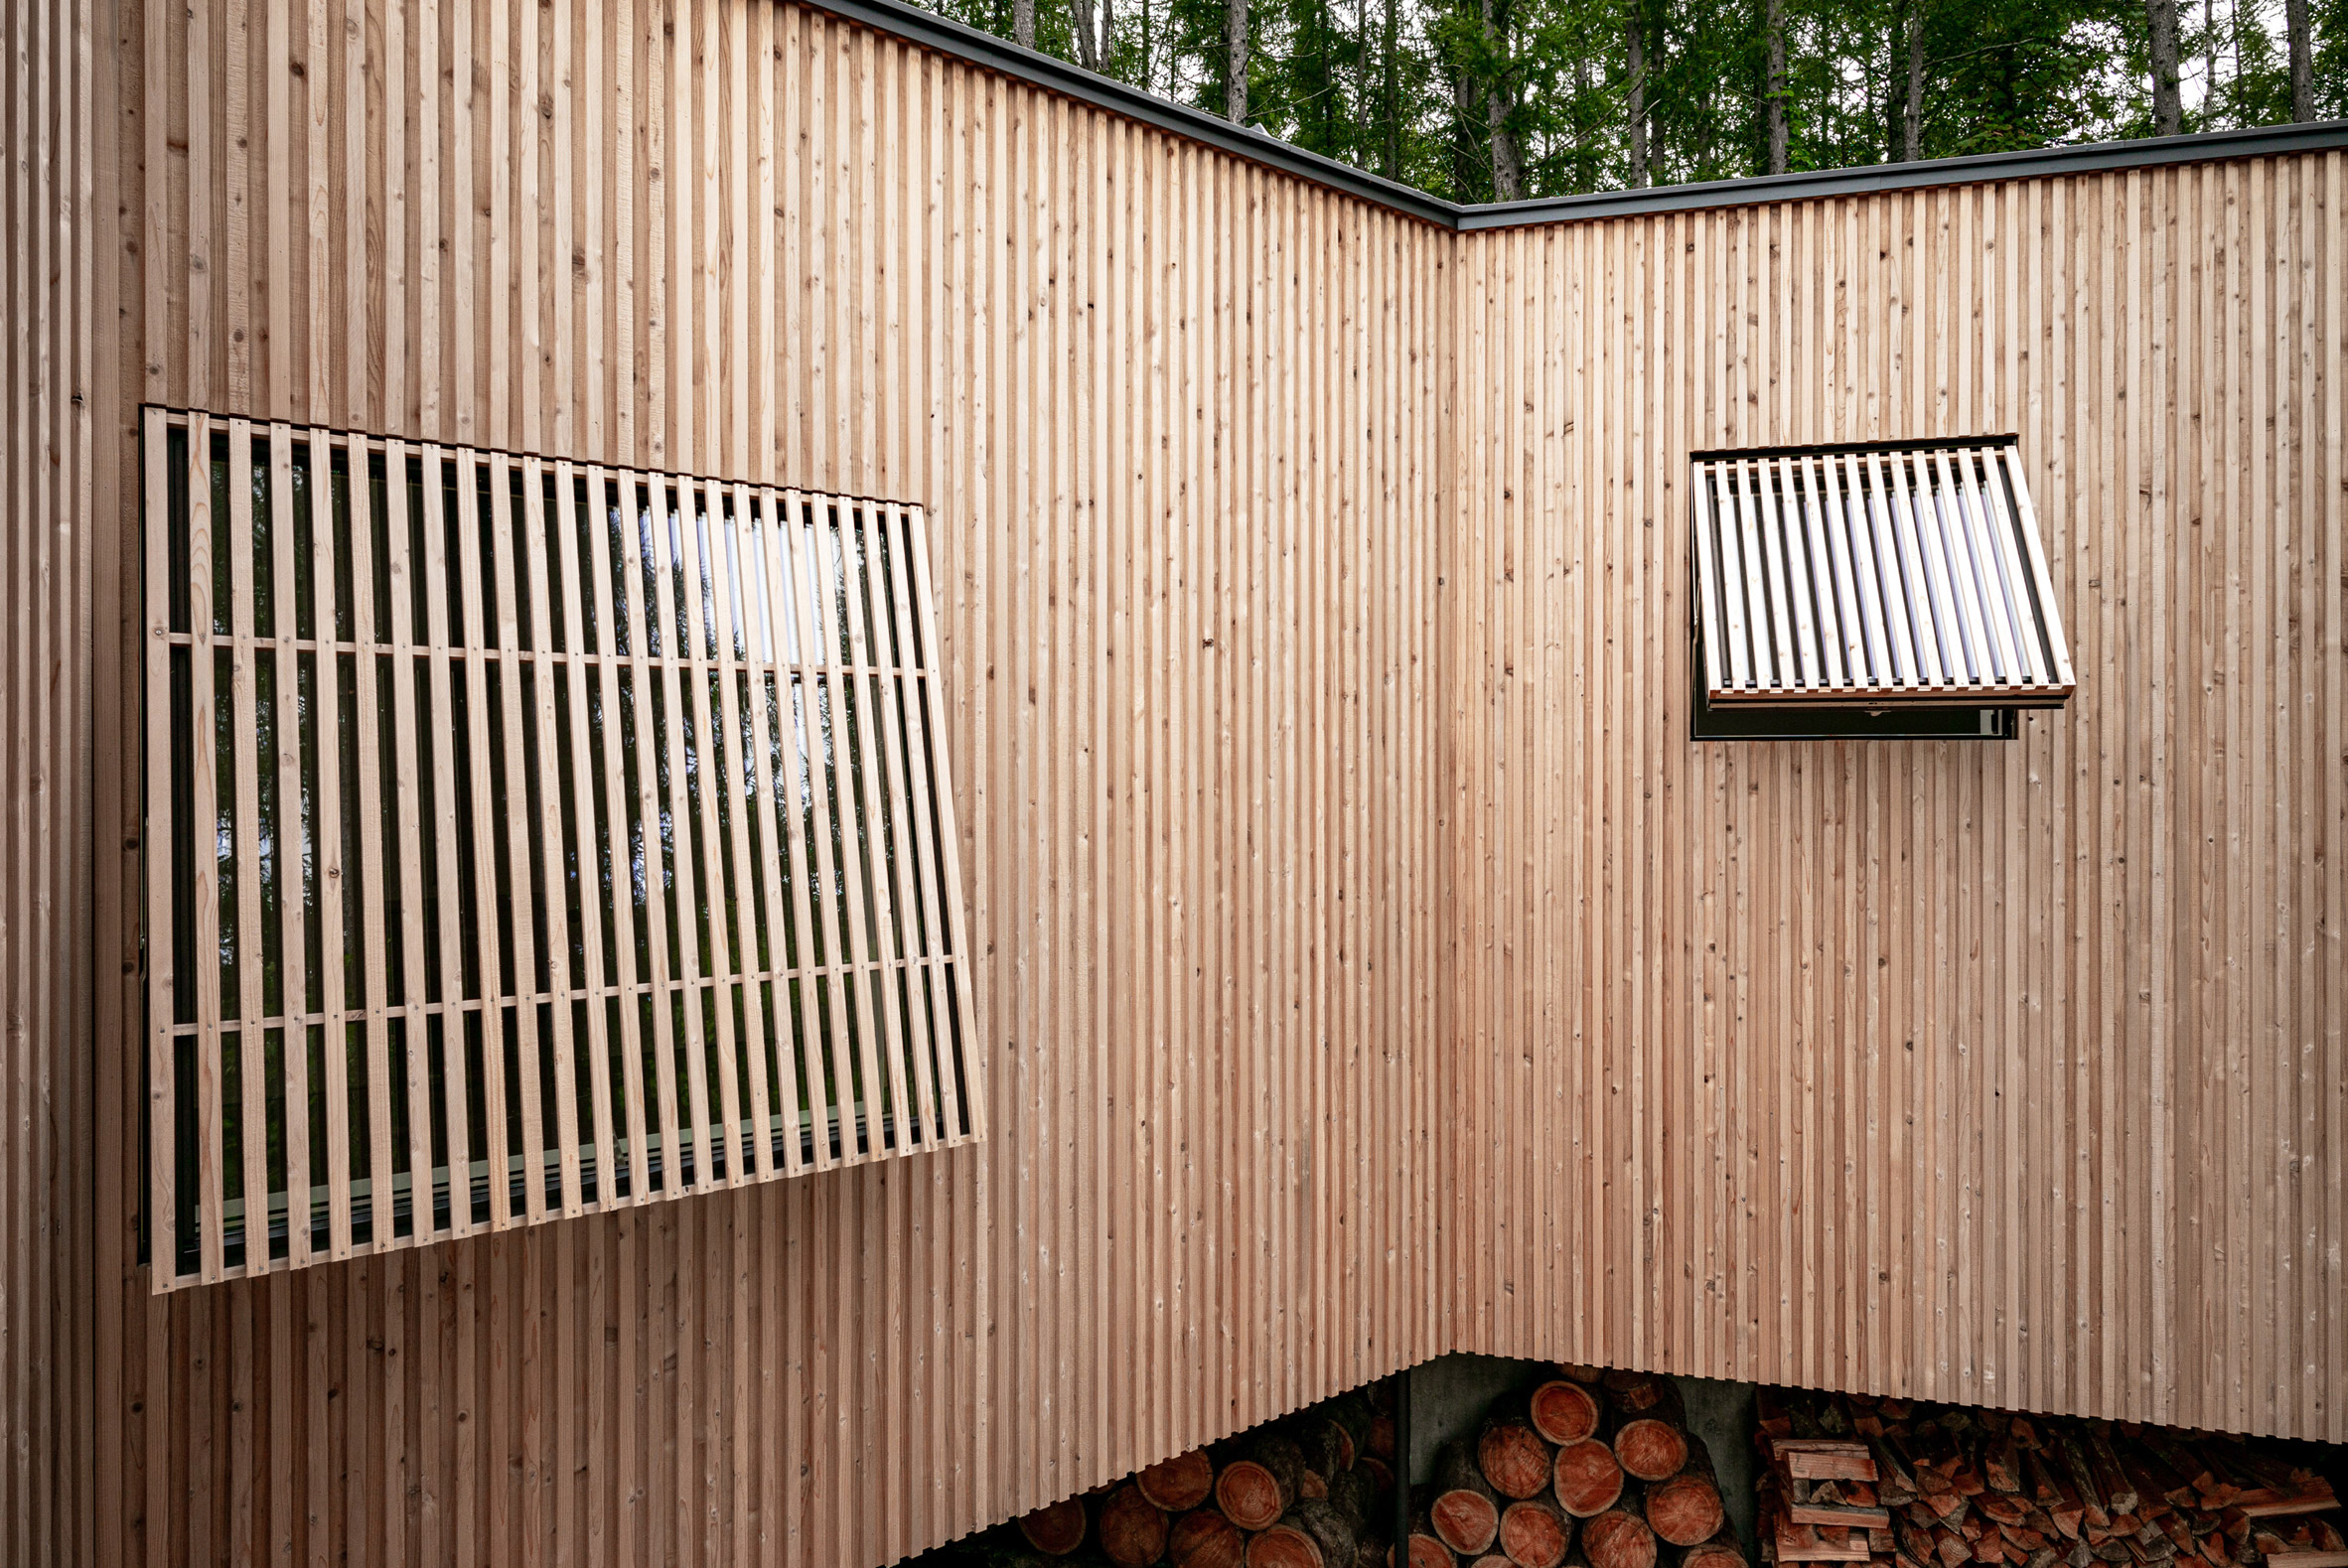 Wooden shade screens cover the windows by Florian Busch